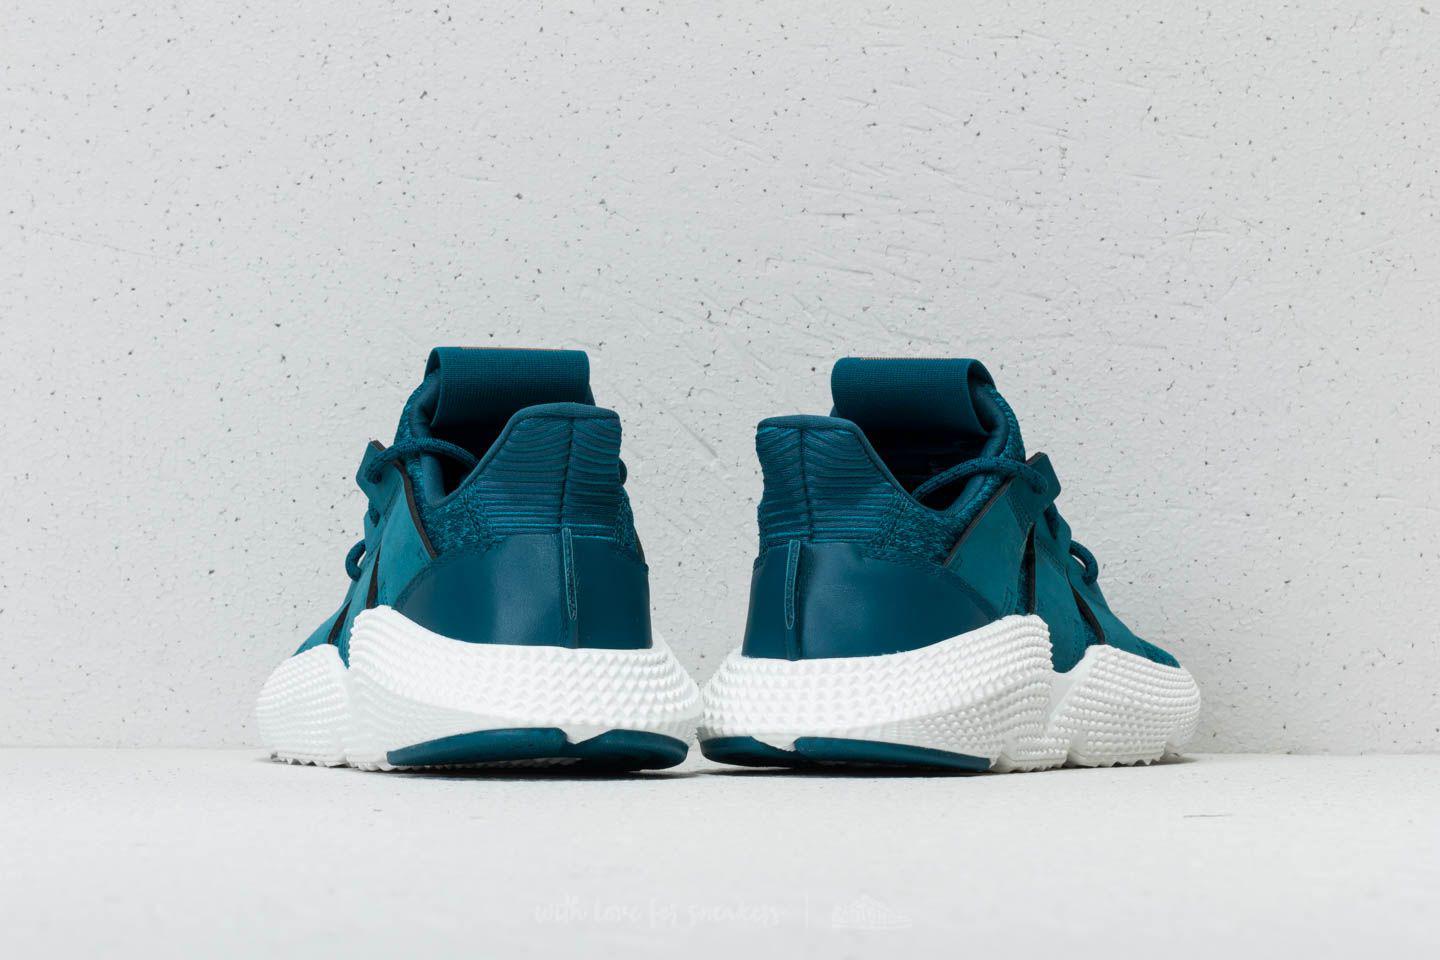 adidas Originals Rubber Adidas Prophere W Real Teal/ Real Teal/ Ftw White  in Blue - Lyst